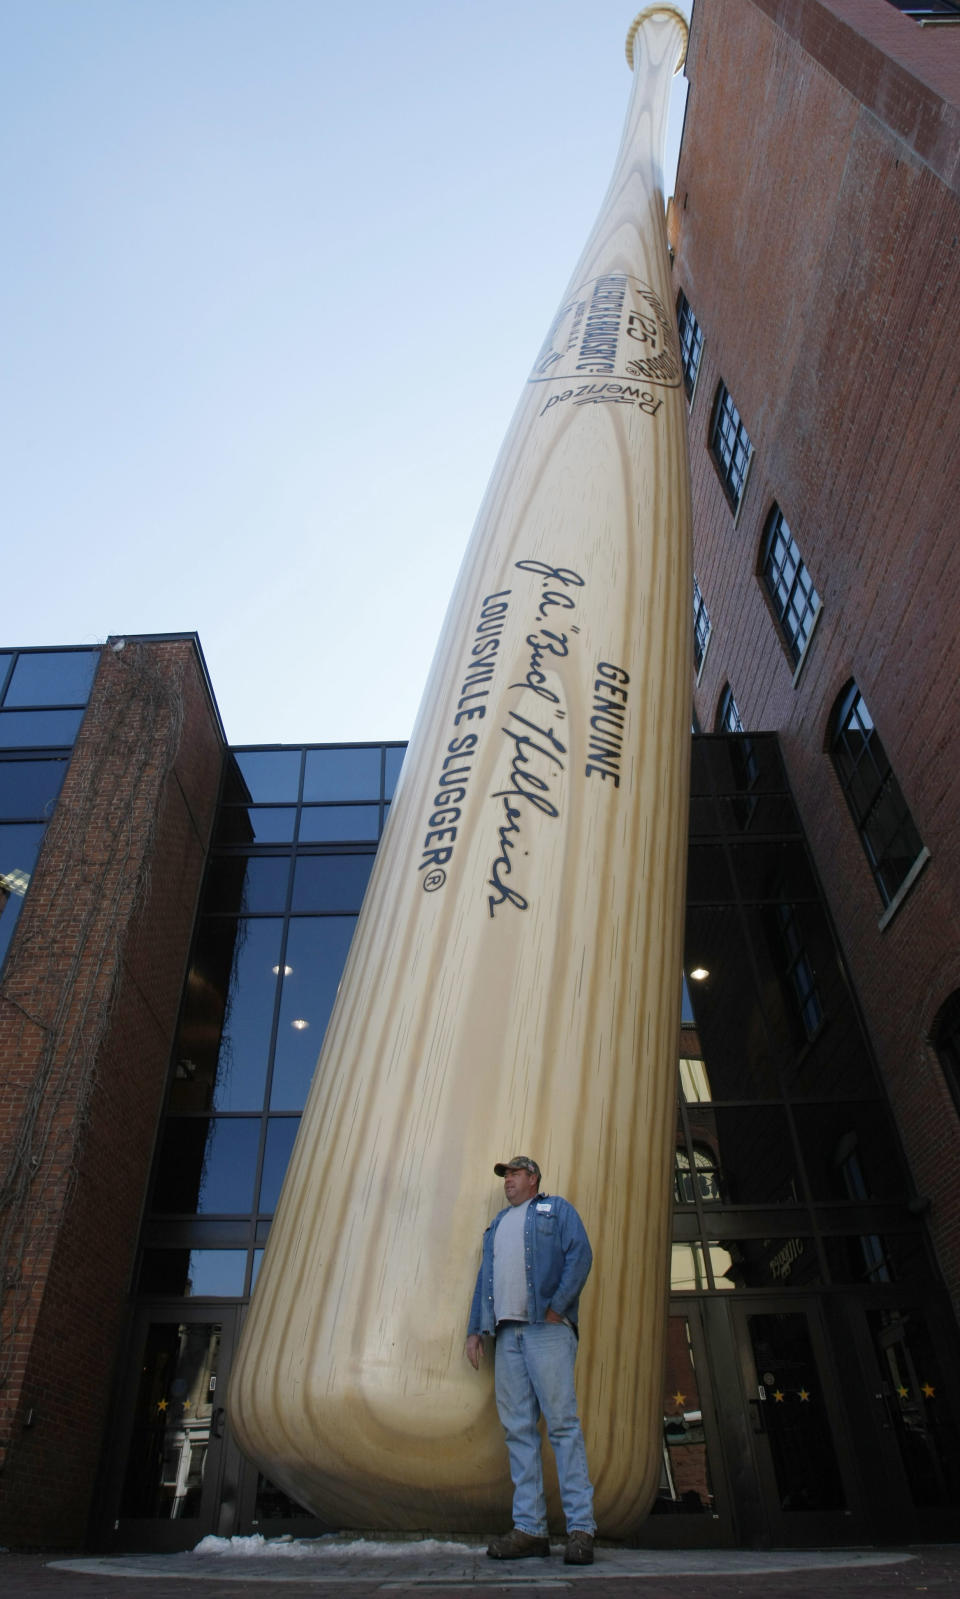 FILE - In this Friday, Feb. 19, 2010 file photo, Bland McCall of Bennettsville, S.C., poses for a photograph in front of the iconic Louisville Slugger bat at the Louisville Slugger Museum & Factory in Louisville, Ky. Although Louisville is best-known for the Derby, visitors in town for the May 5, 2012 race will find plenty of other things to do and see around town, from museums to historic hotels to trendy restaurants. (AP Photo/Ed Reinke)